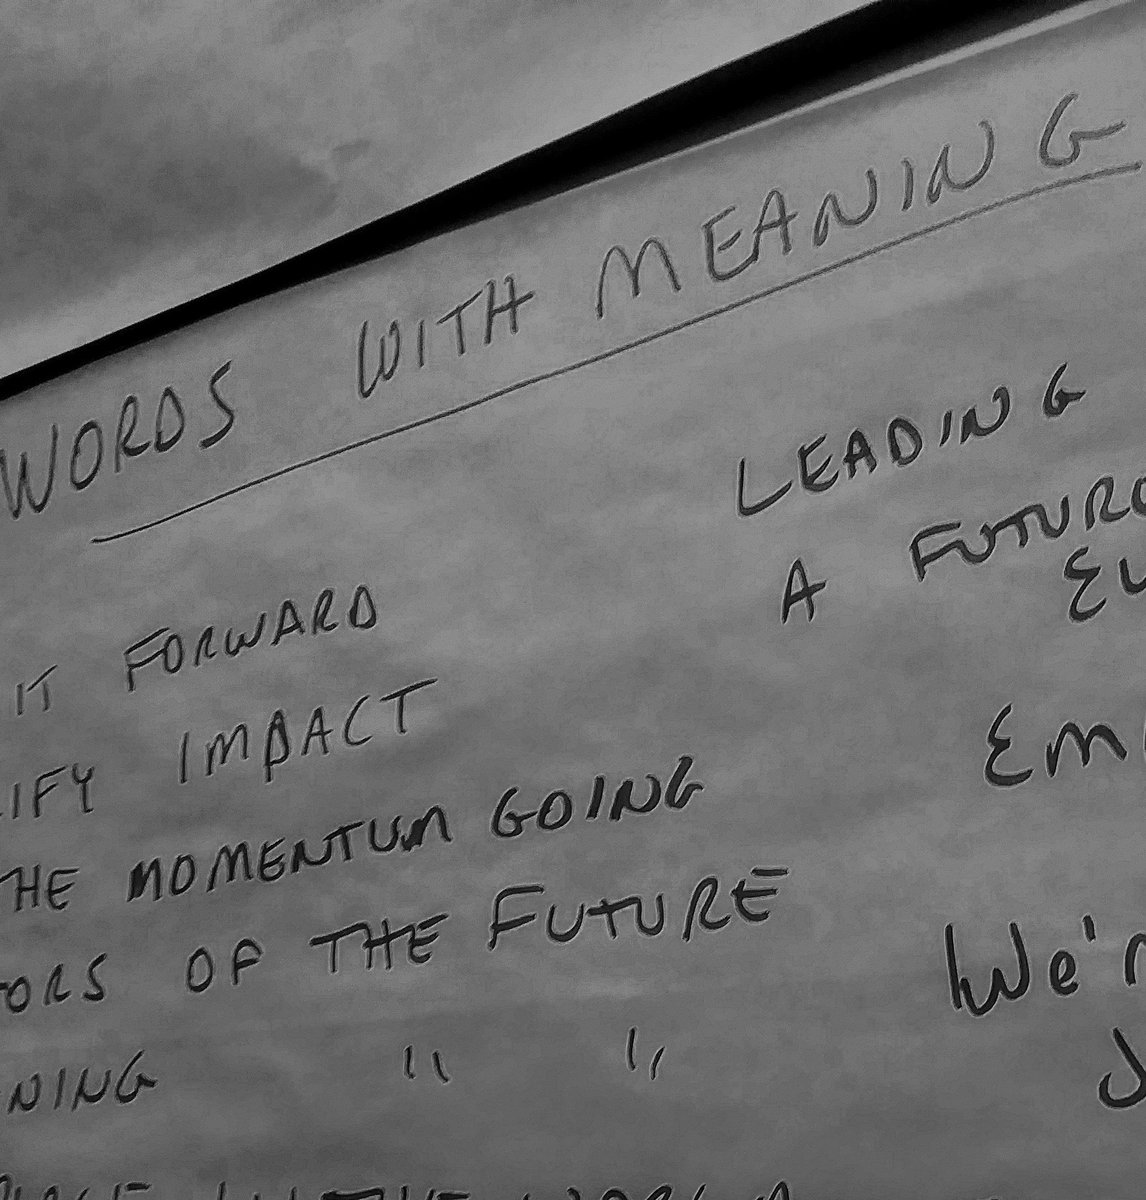 Just wrapped another successful #EventDesign workshop! What words have meaning for your organization? #LAILive #EventProfs #Future #CheersTo2018 #WordsWithMeaning